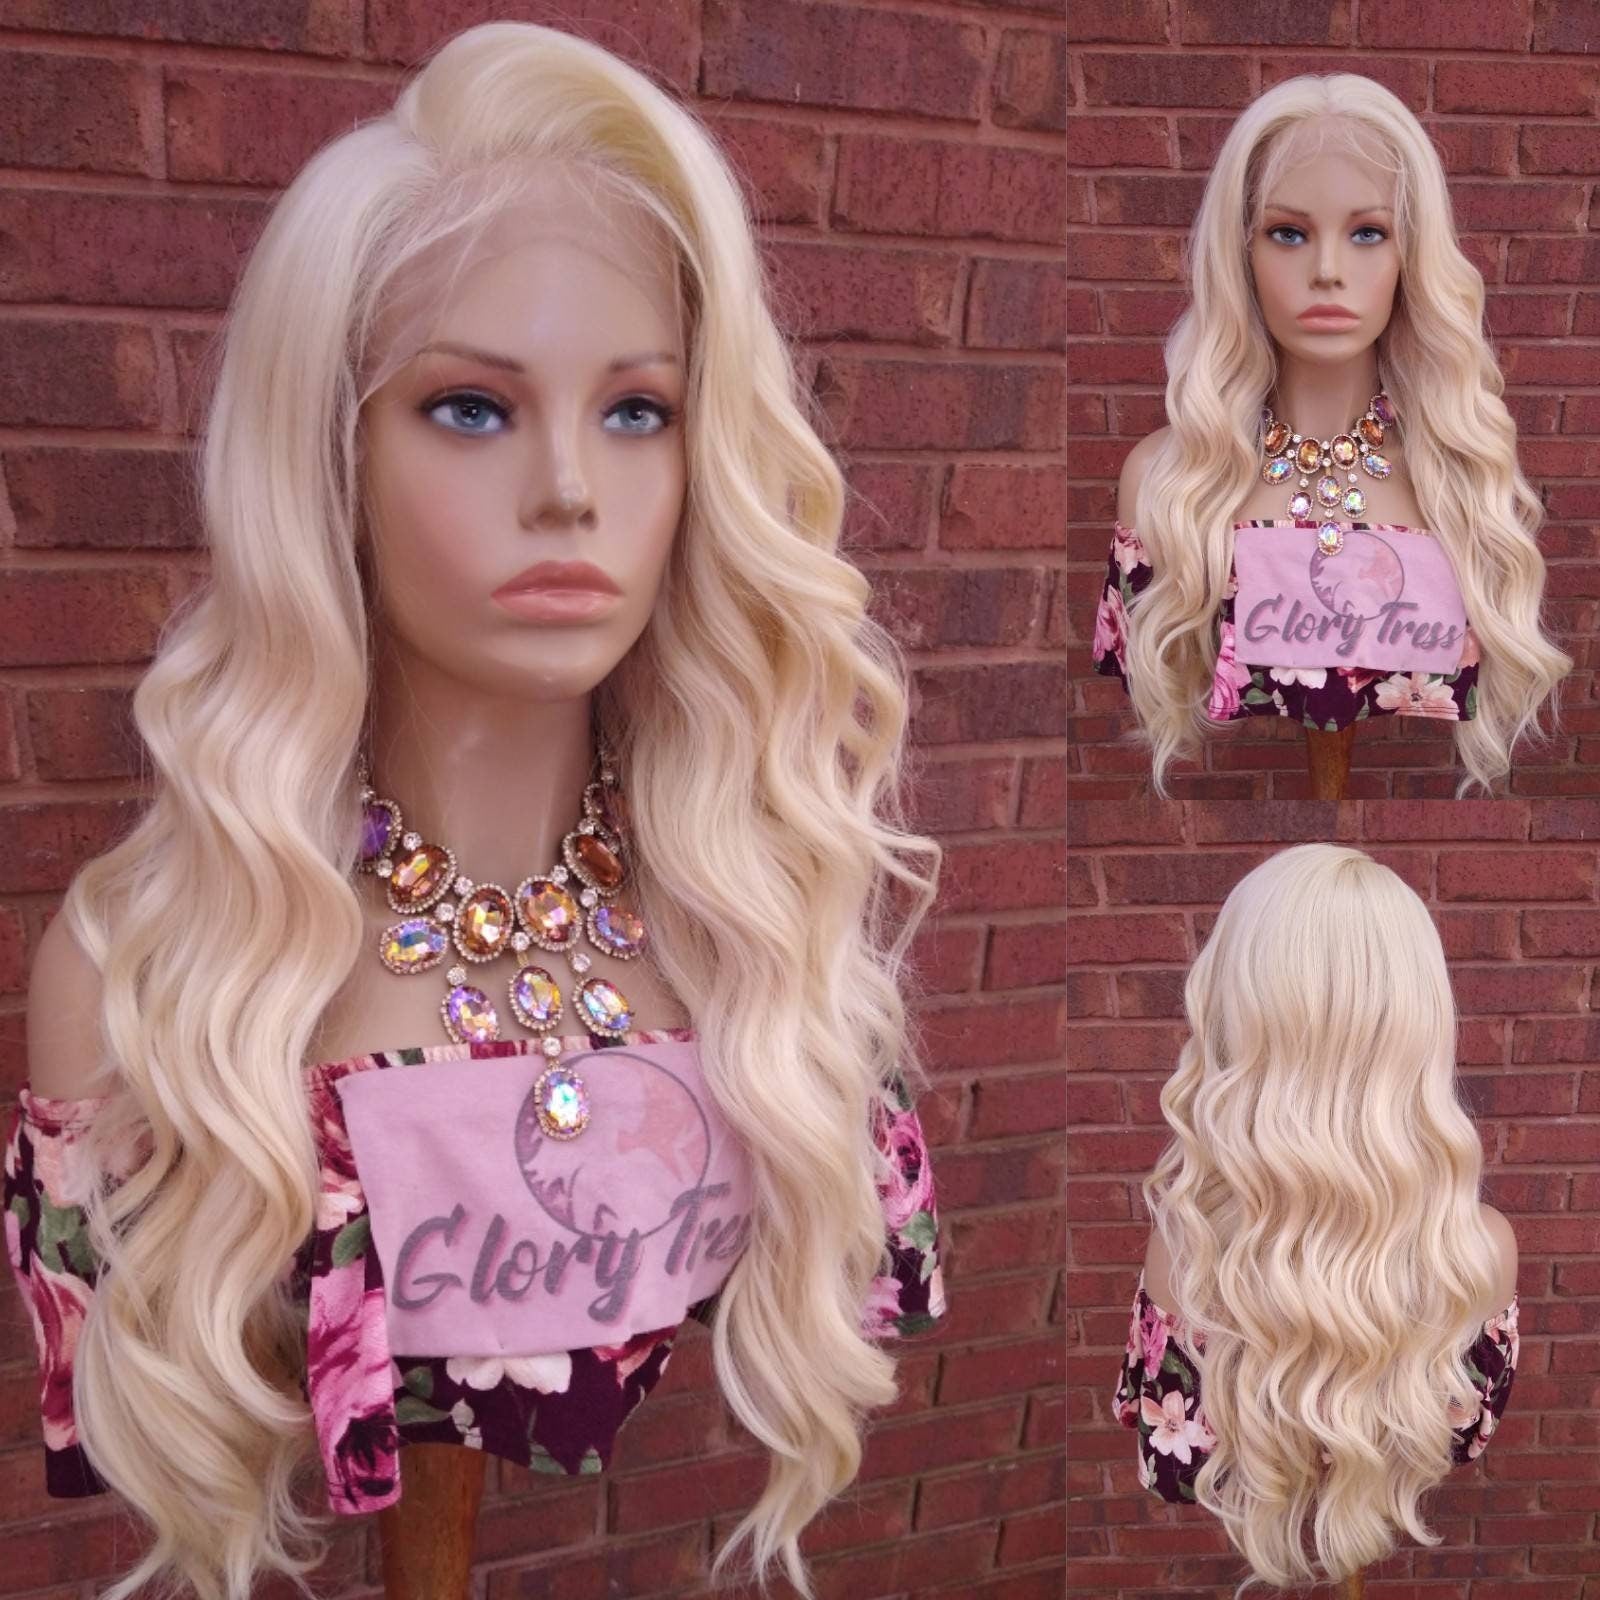 Long Glamorous Wavy Lace Front Wig Pre-Plucked HD Lace Human Blend Wigs For Women Platinum Blonde Wig 13x6 Free Parting Glory Tress - ANGEL